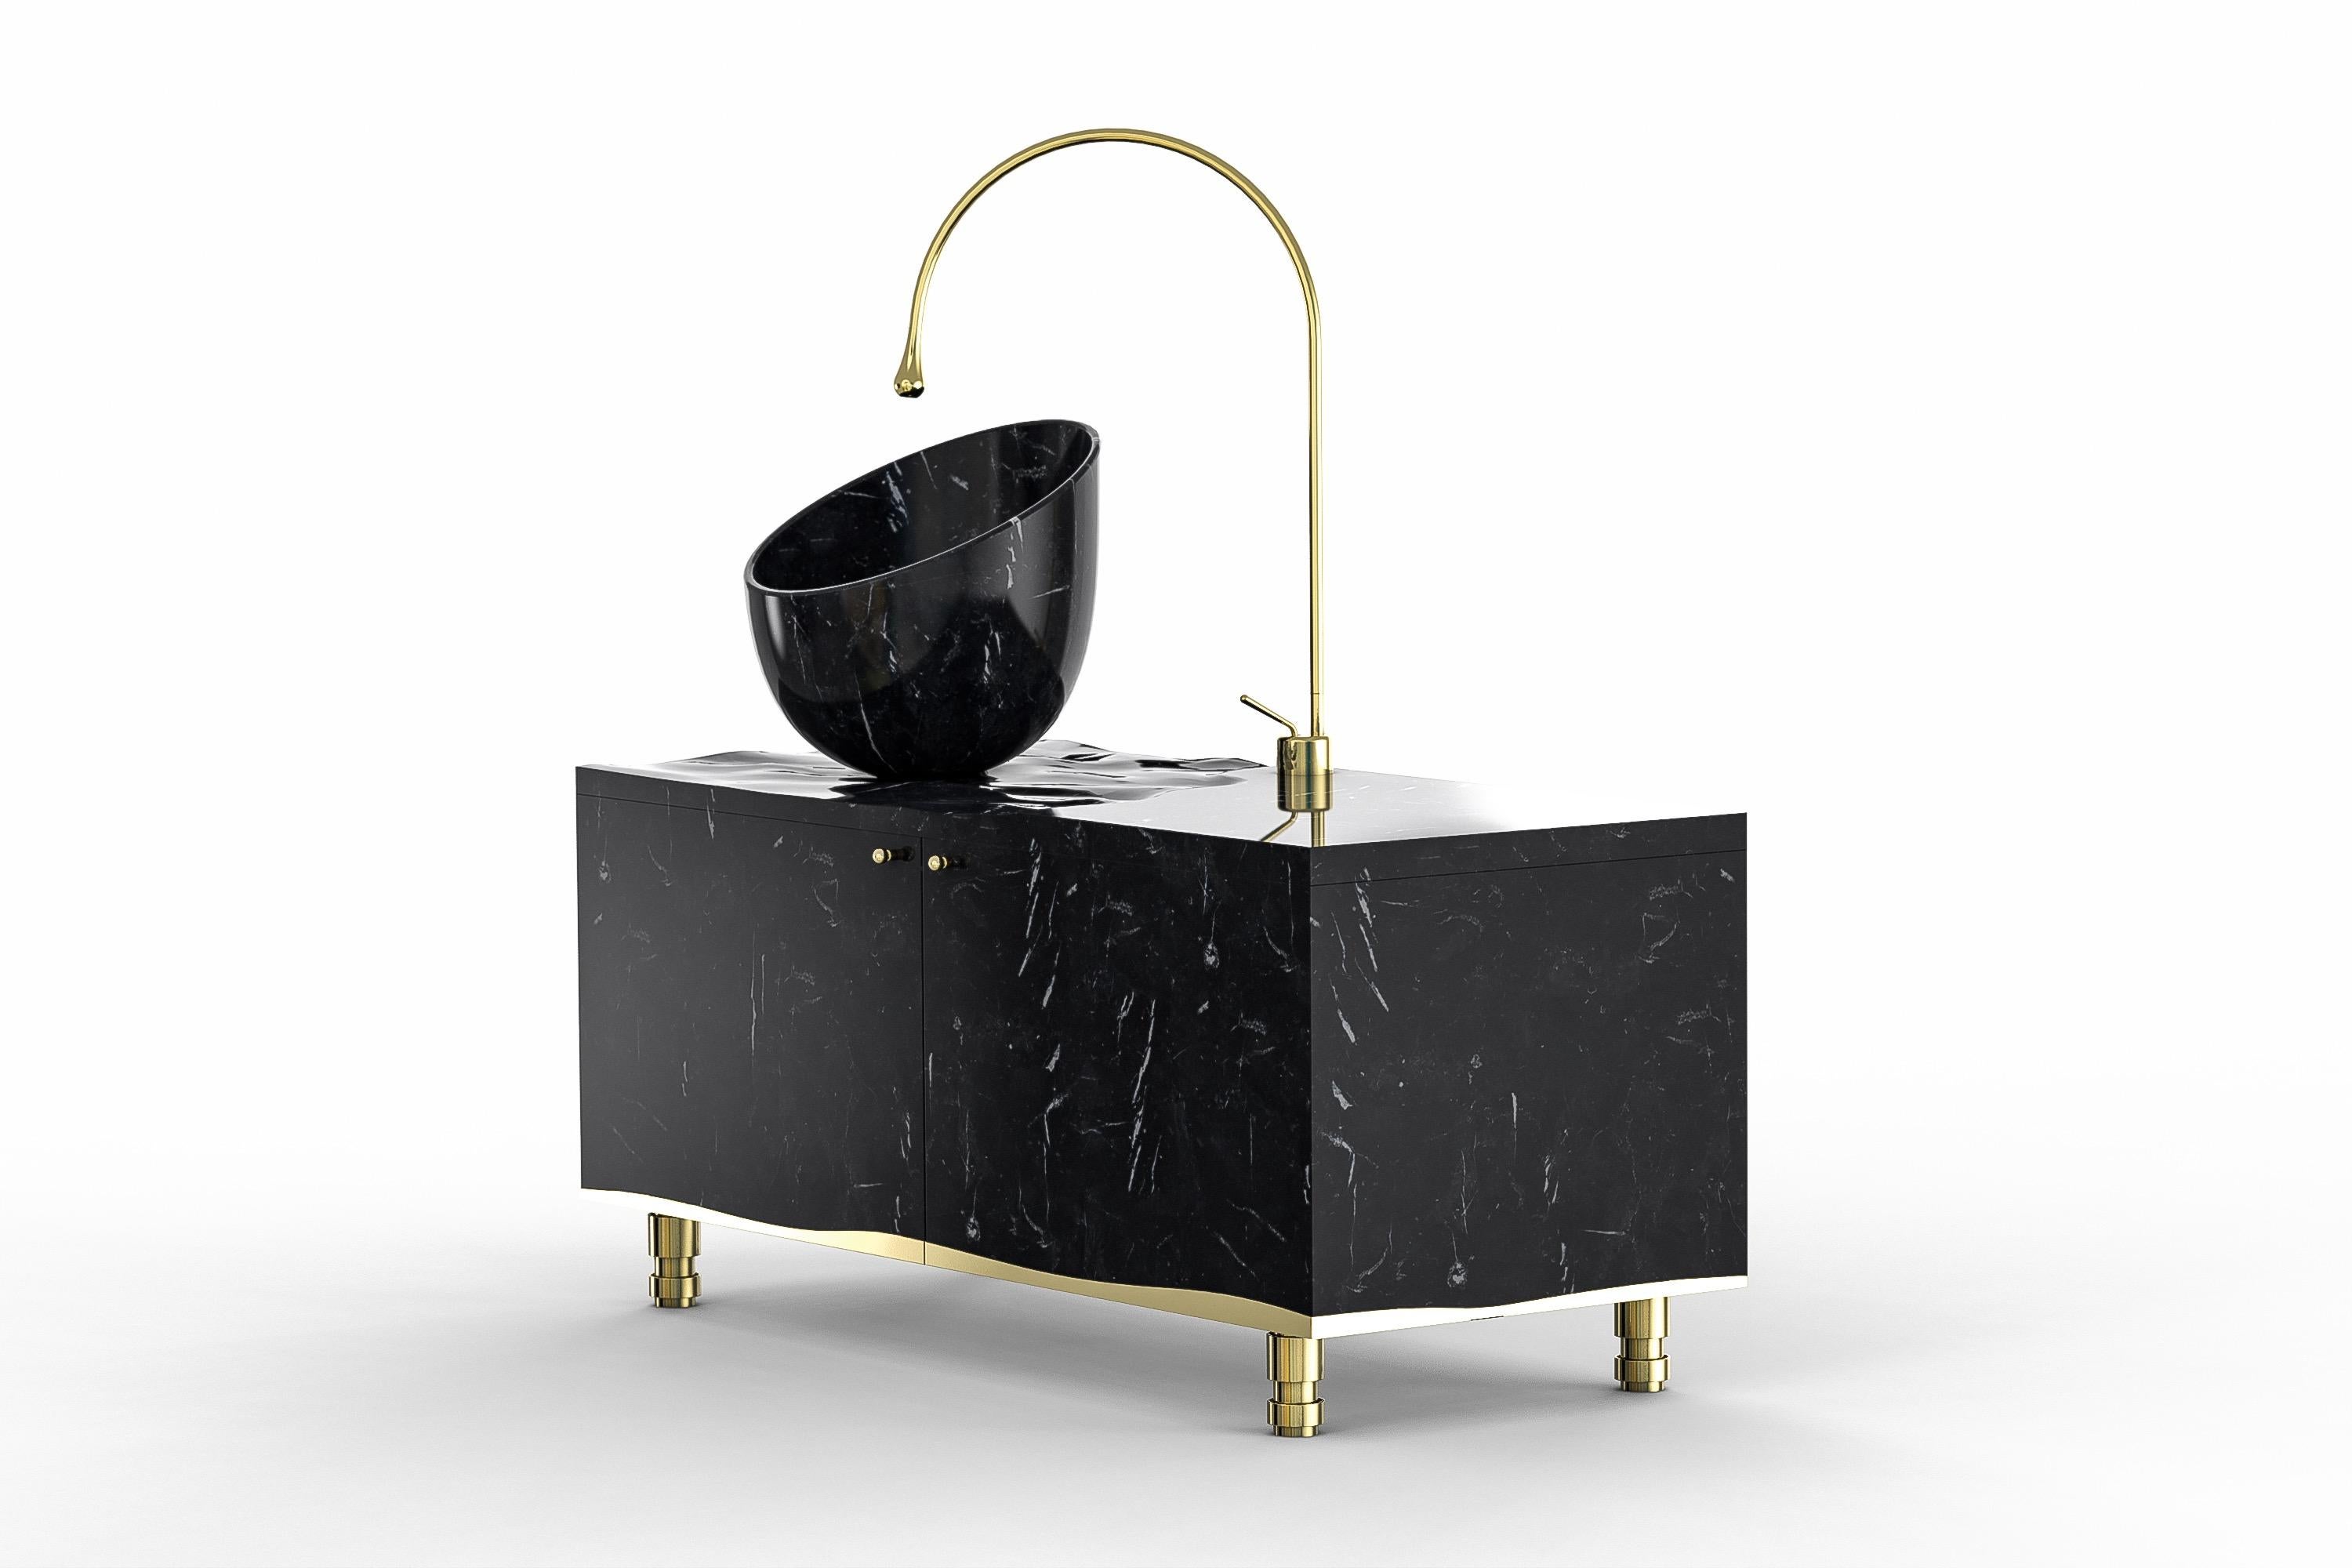 Float washbasin and cabinet by Marmi Serafini.
Materials: Nero Marquina marble, brass.
Dimensions: D 50 x W 120 x H 88 cm
Available in other marbles.

Cabinet made to be in a synergy with the surrounding water elements and the bathroom environment.